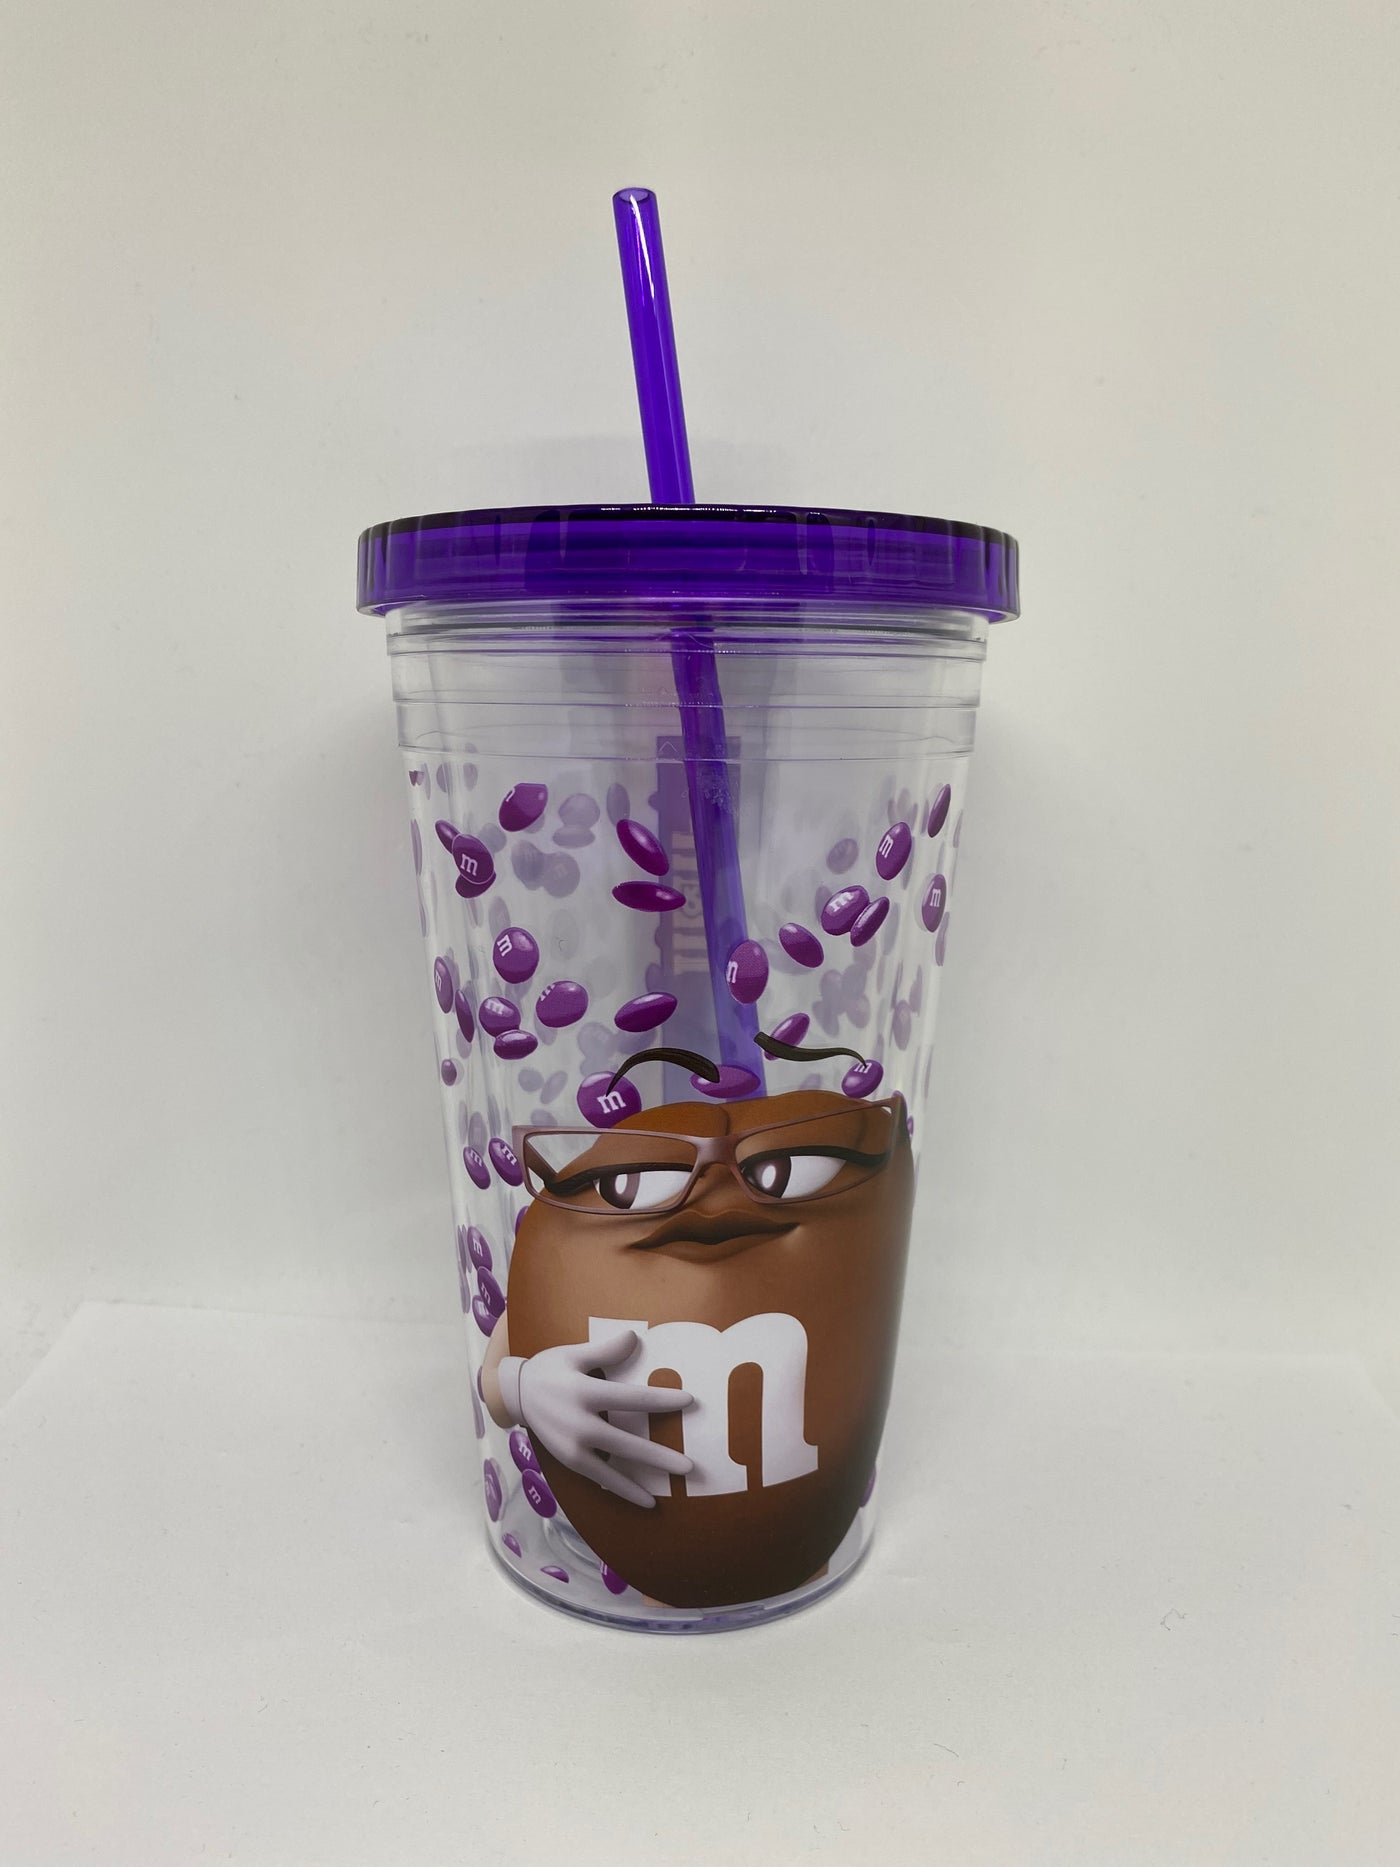 M&M's World Brown Big Face Lentils Tumbler with Straw New